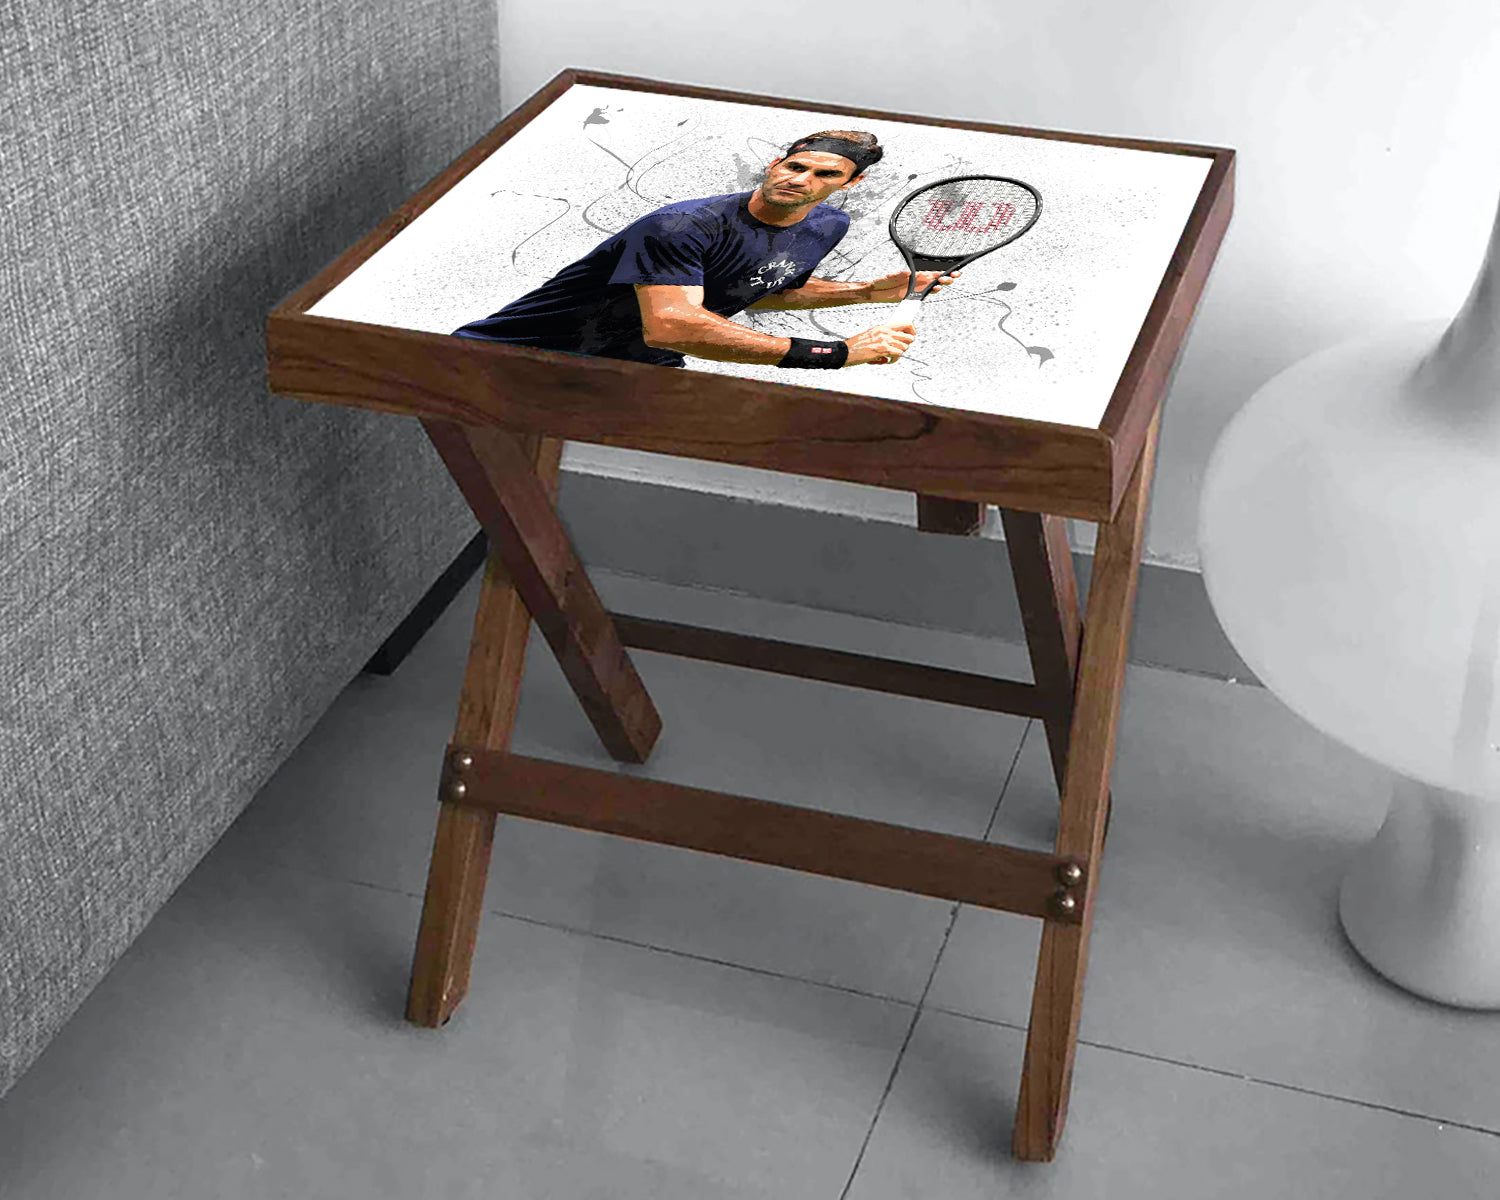 Roger Federe Splash Effect Coffee and Laptop Table 